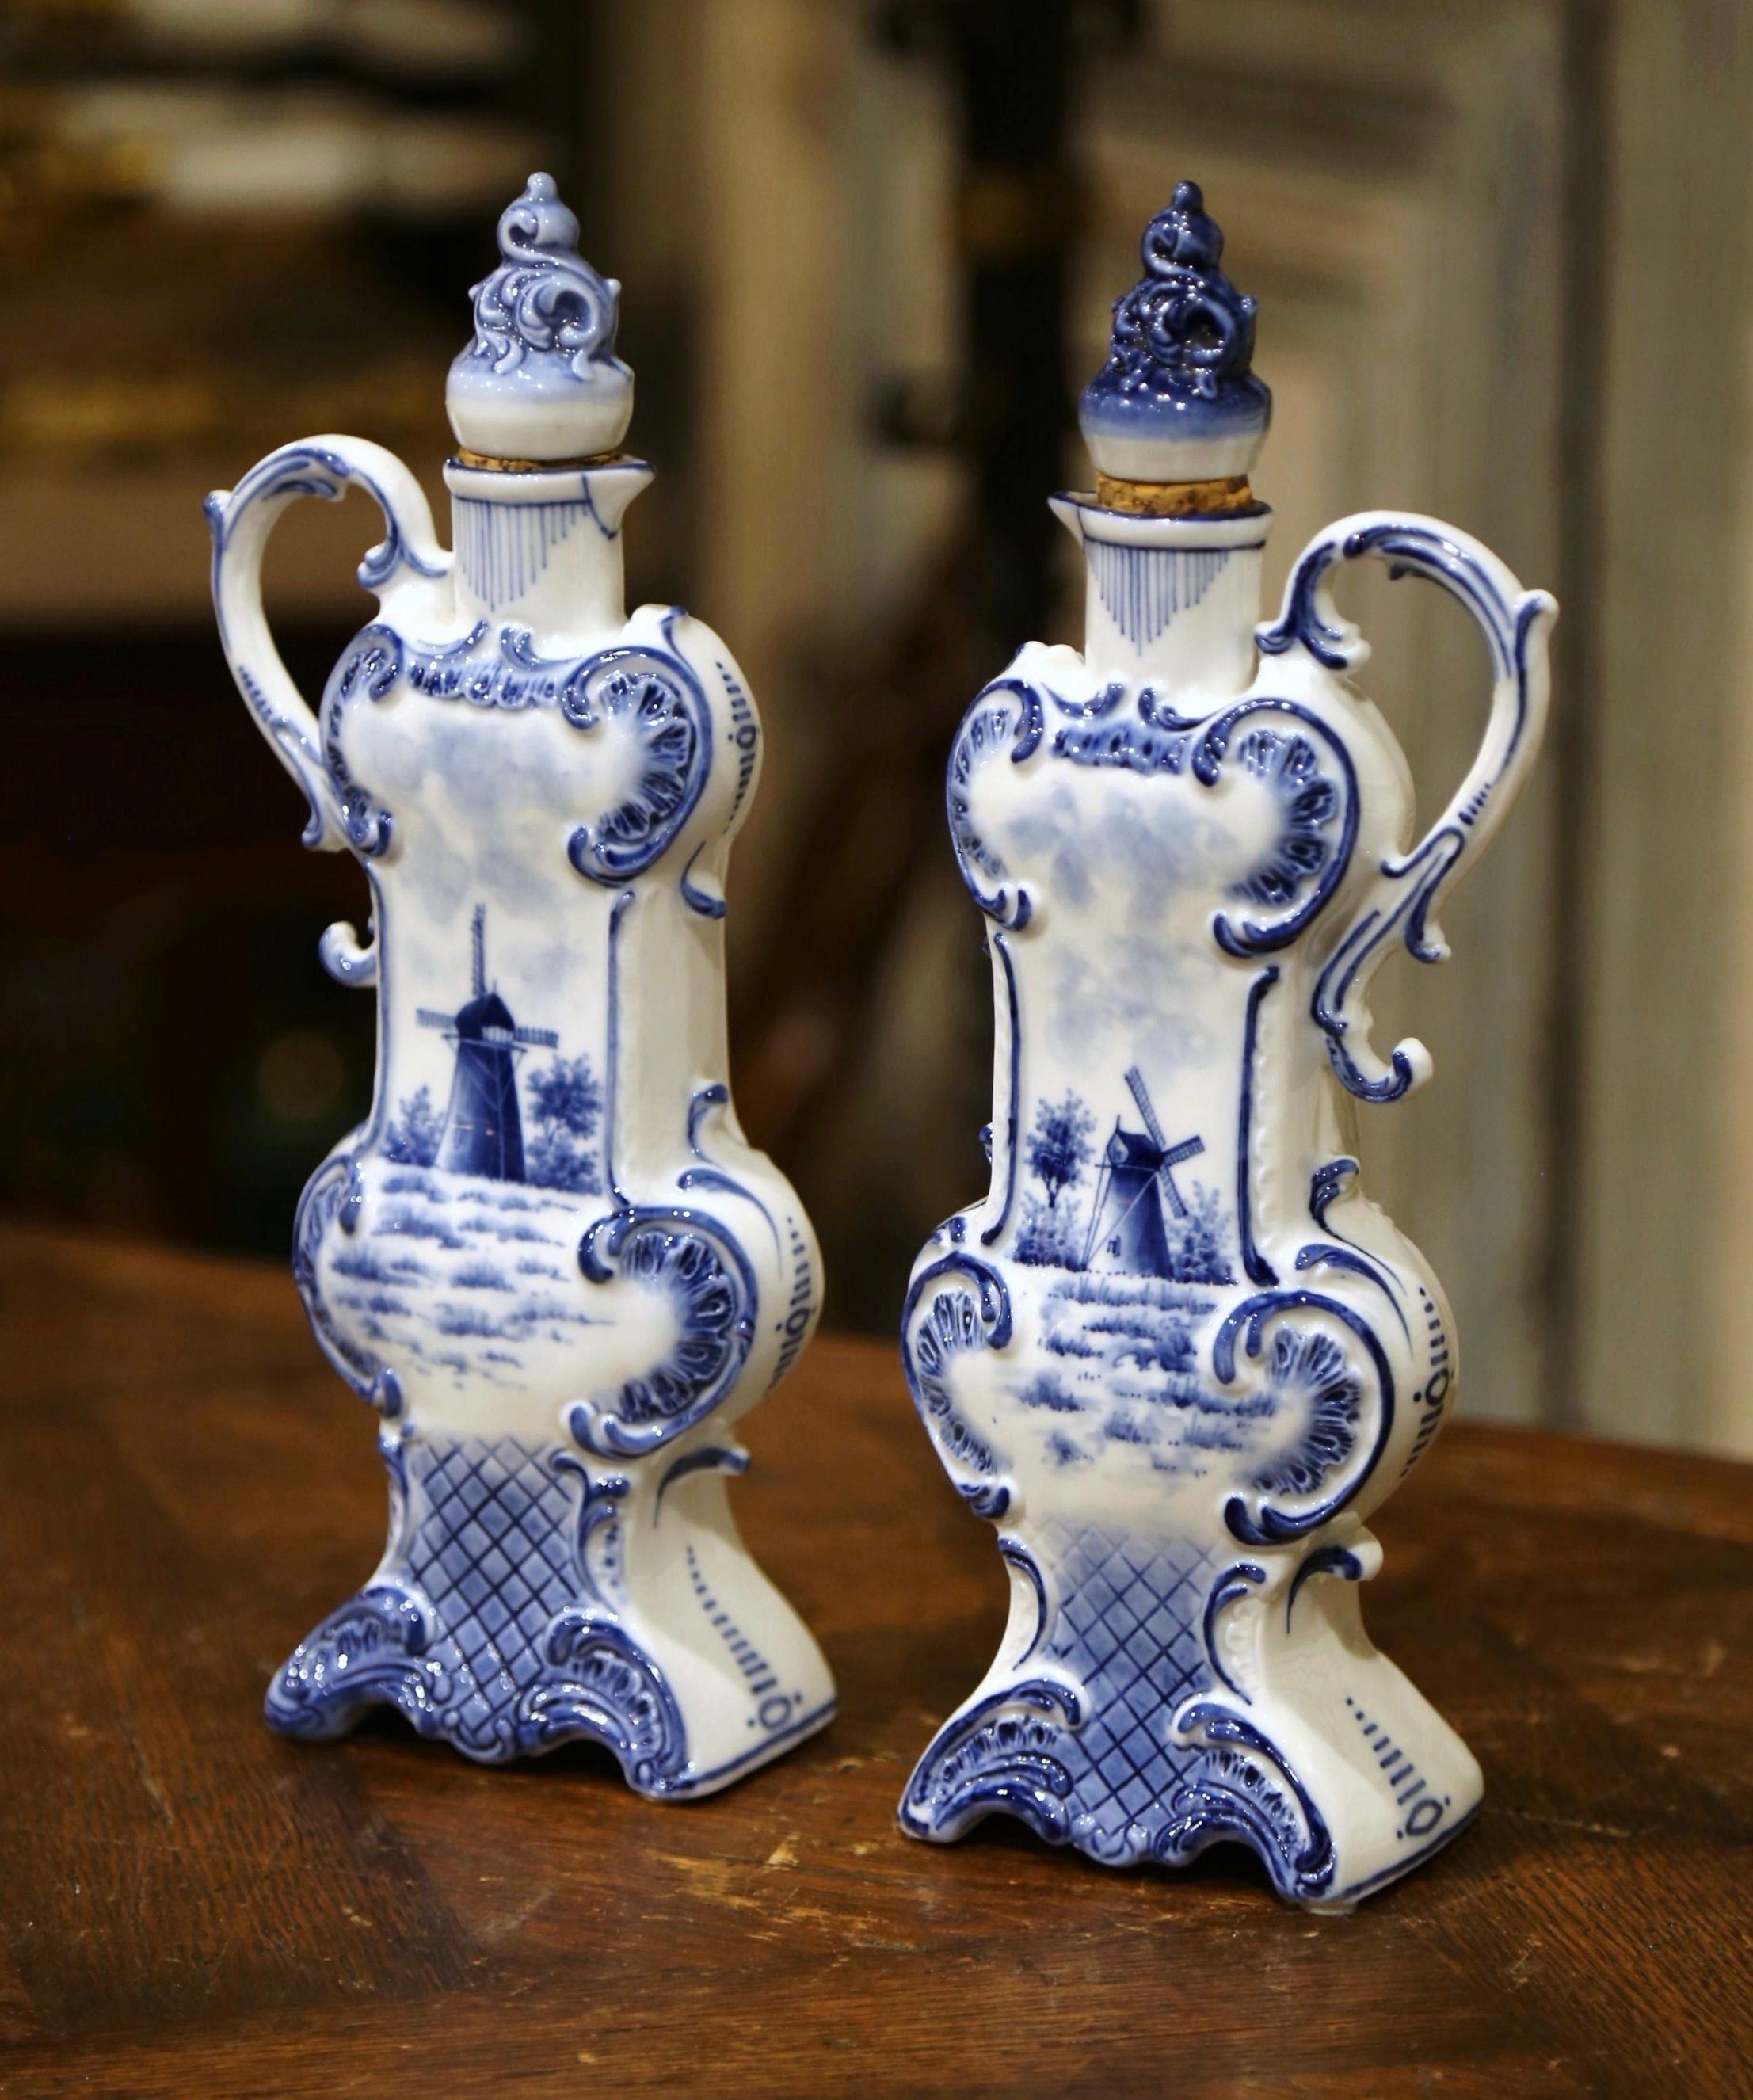 Decorate a shelf or kitchen counter with this elegant pair of antique Delft olive oil containers. Crafted in Holland circa 1920, both tall vases with cork tops, feature an intricate shape and are dressed with a side handle. Each vessel is hand